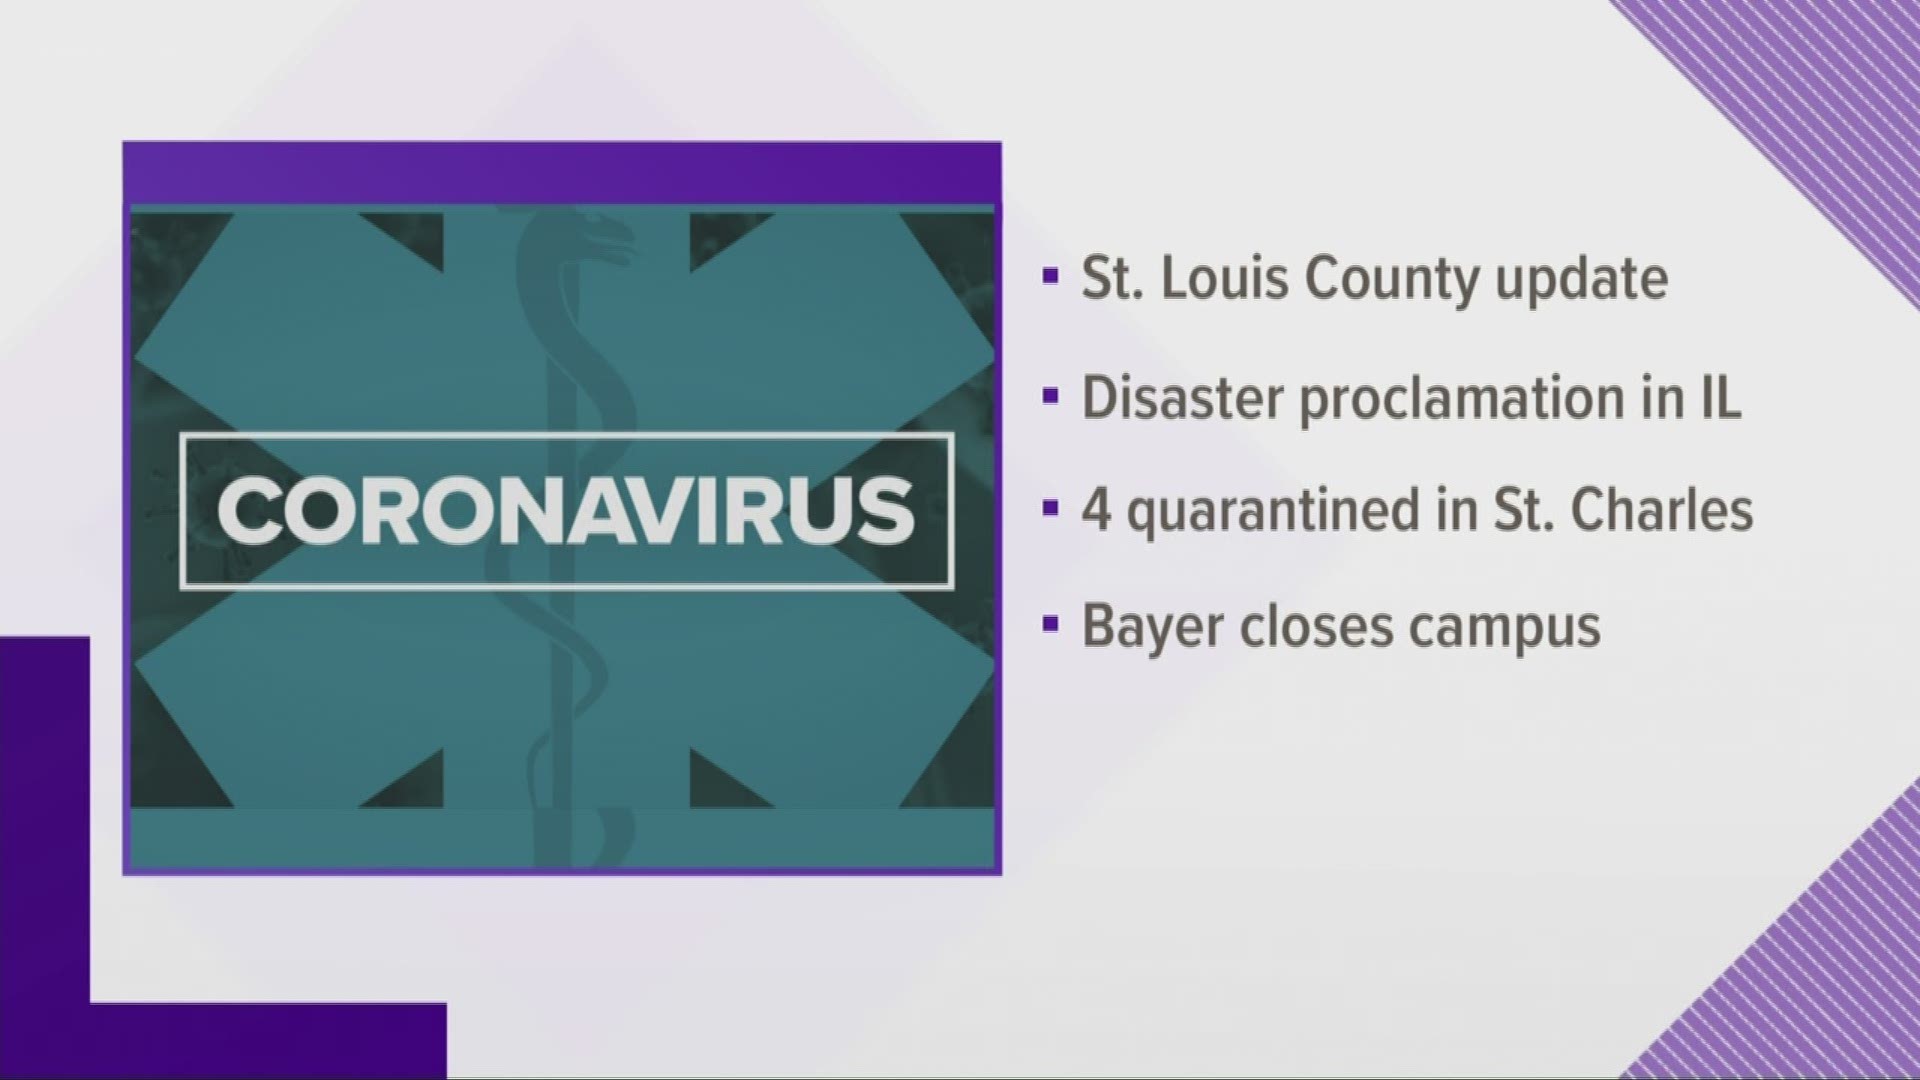 More information about the coronavirus continues to come in about the St. Louis area